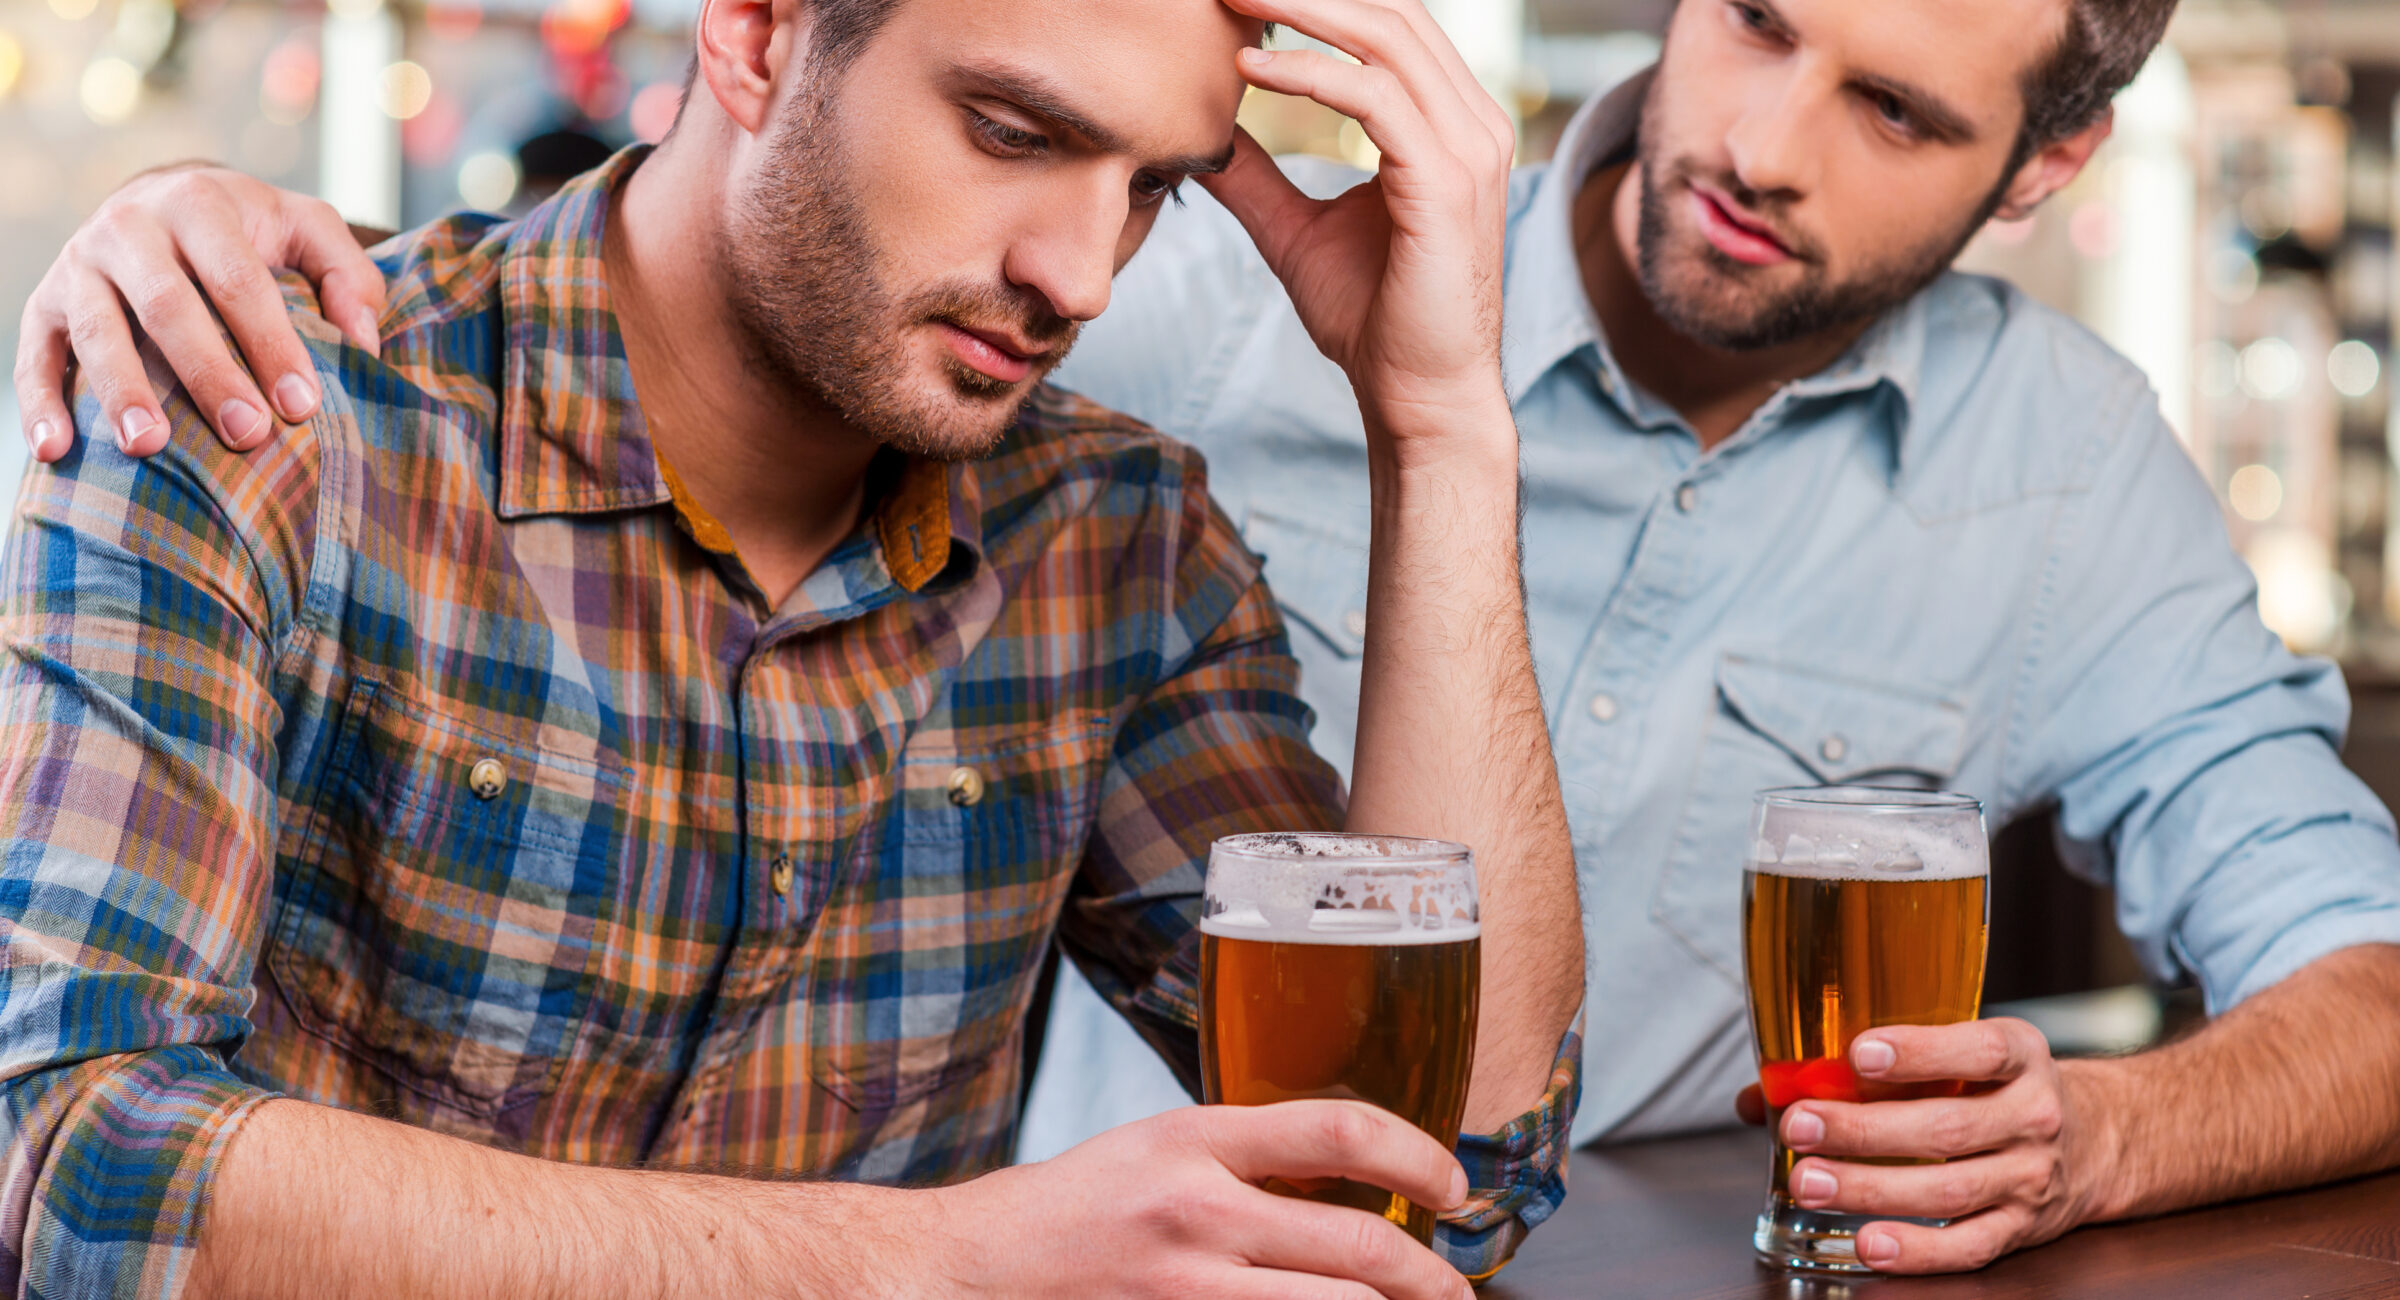 Depressed young man sitting at the bar counter and holding head in hand while being consoled by his friend sitting near him